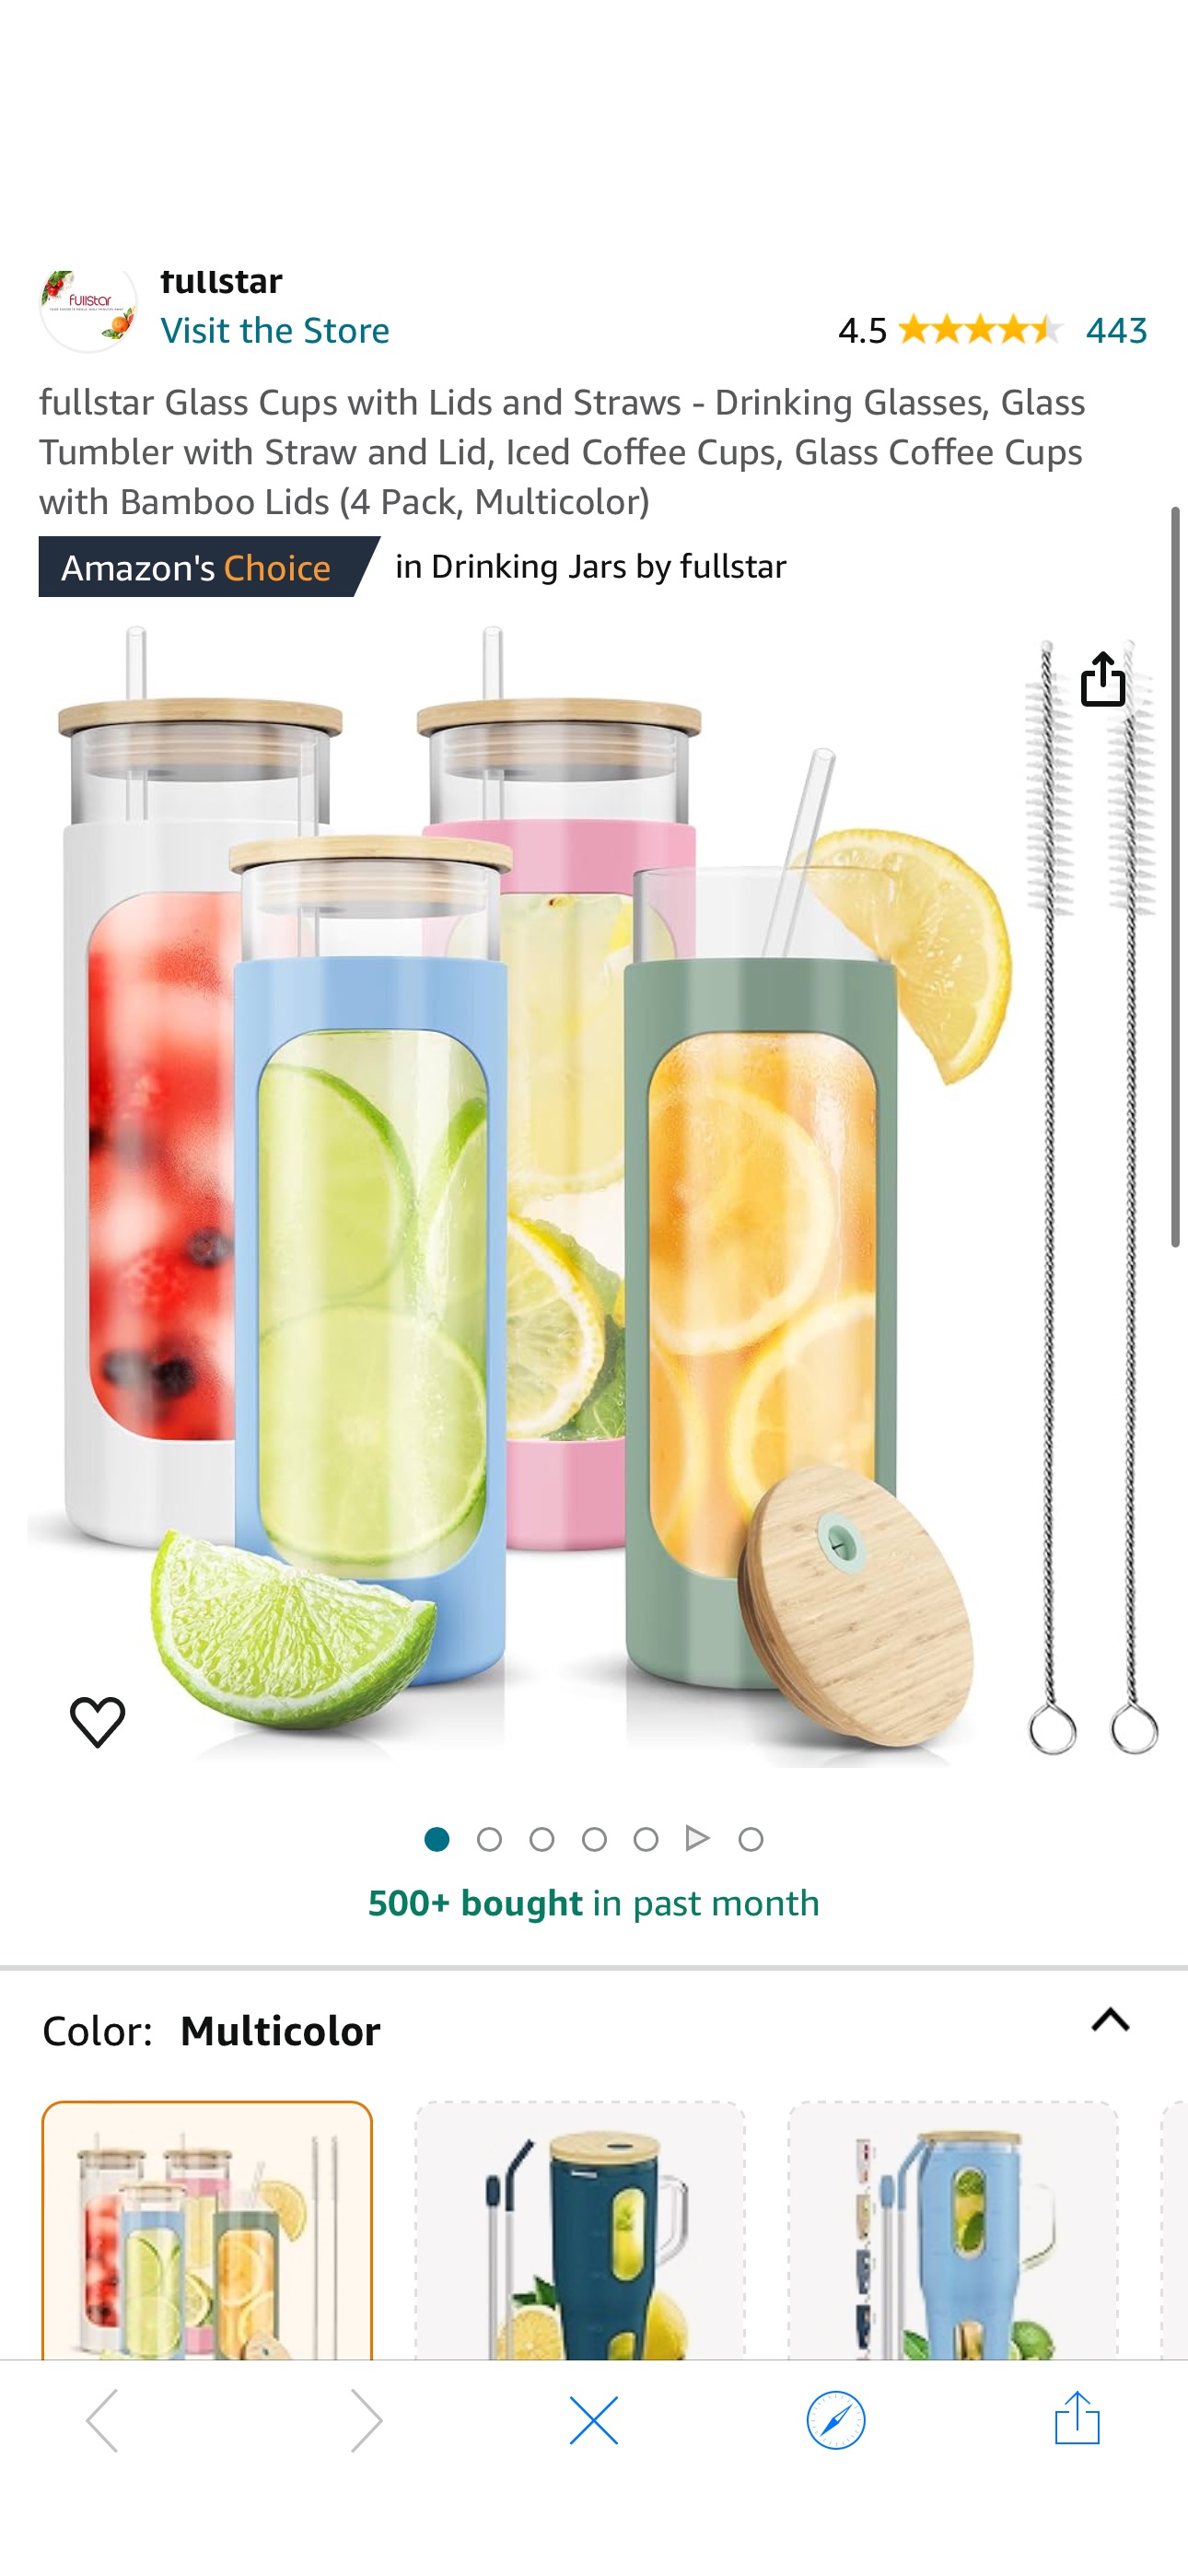 Amazon.com | fullstar Glass Cups with Lids and Straws - Drinking Glasses, Glass Tumbler with Straw and Lid, Iced Coffee Cups, Glass Coffee Cups with Bamboo Lids (4 Pack, Multicolor): Tumblers & Water 